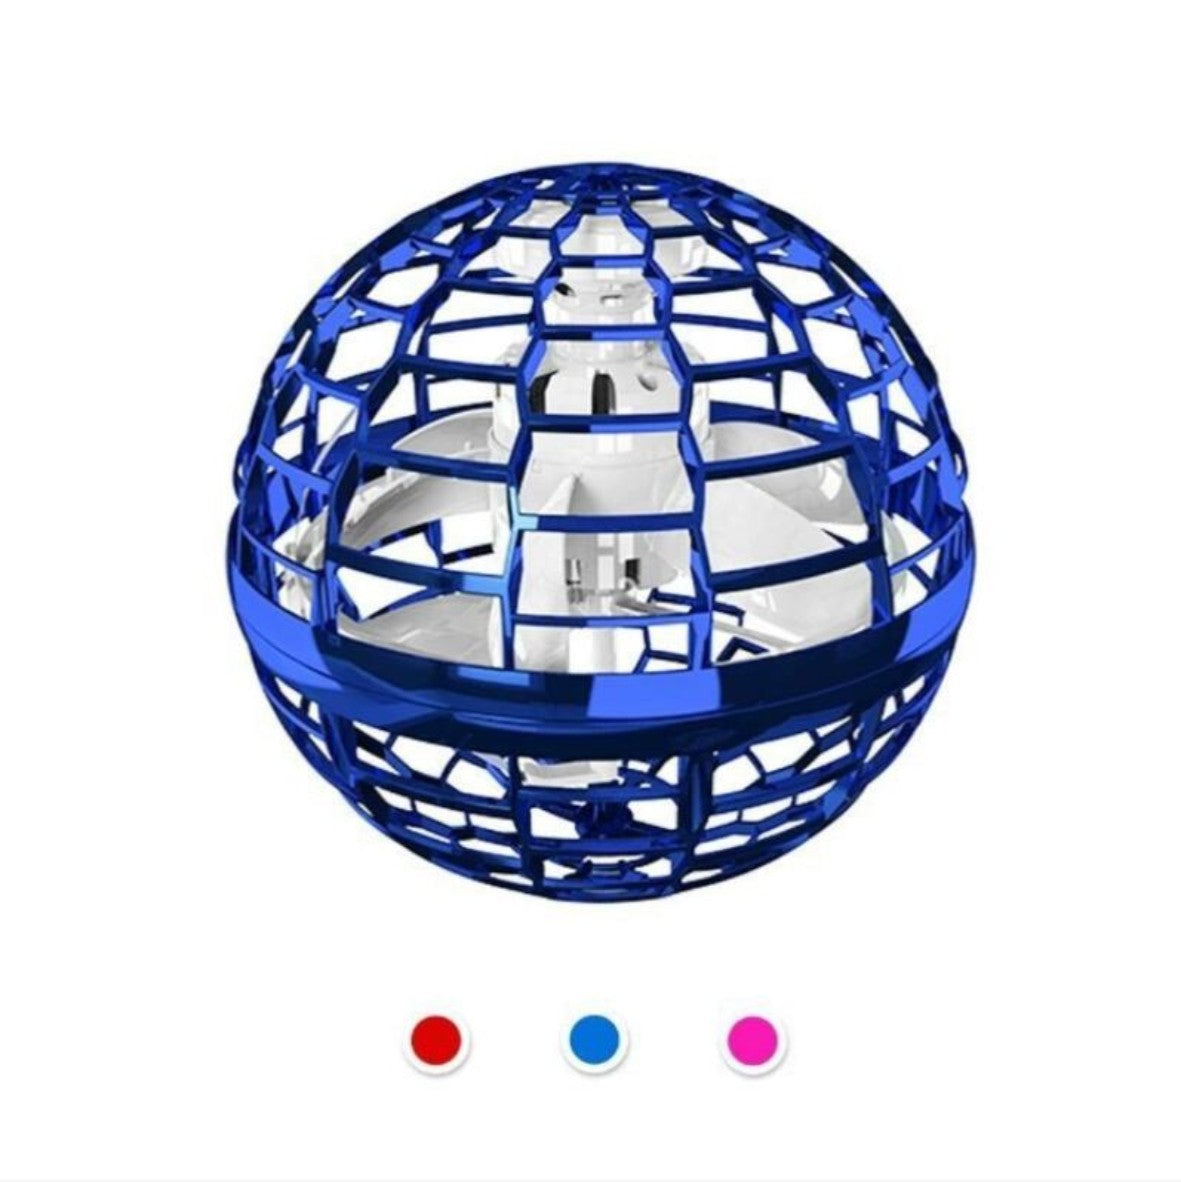 Magic swing ball flying ball toy, gesture intelligent sensing aircraft toy, luminous floating ball toy；